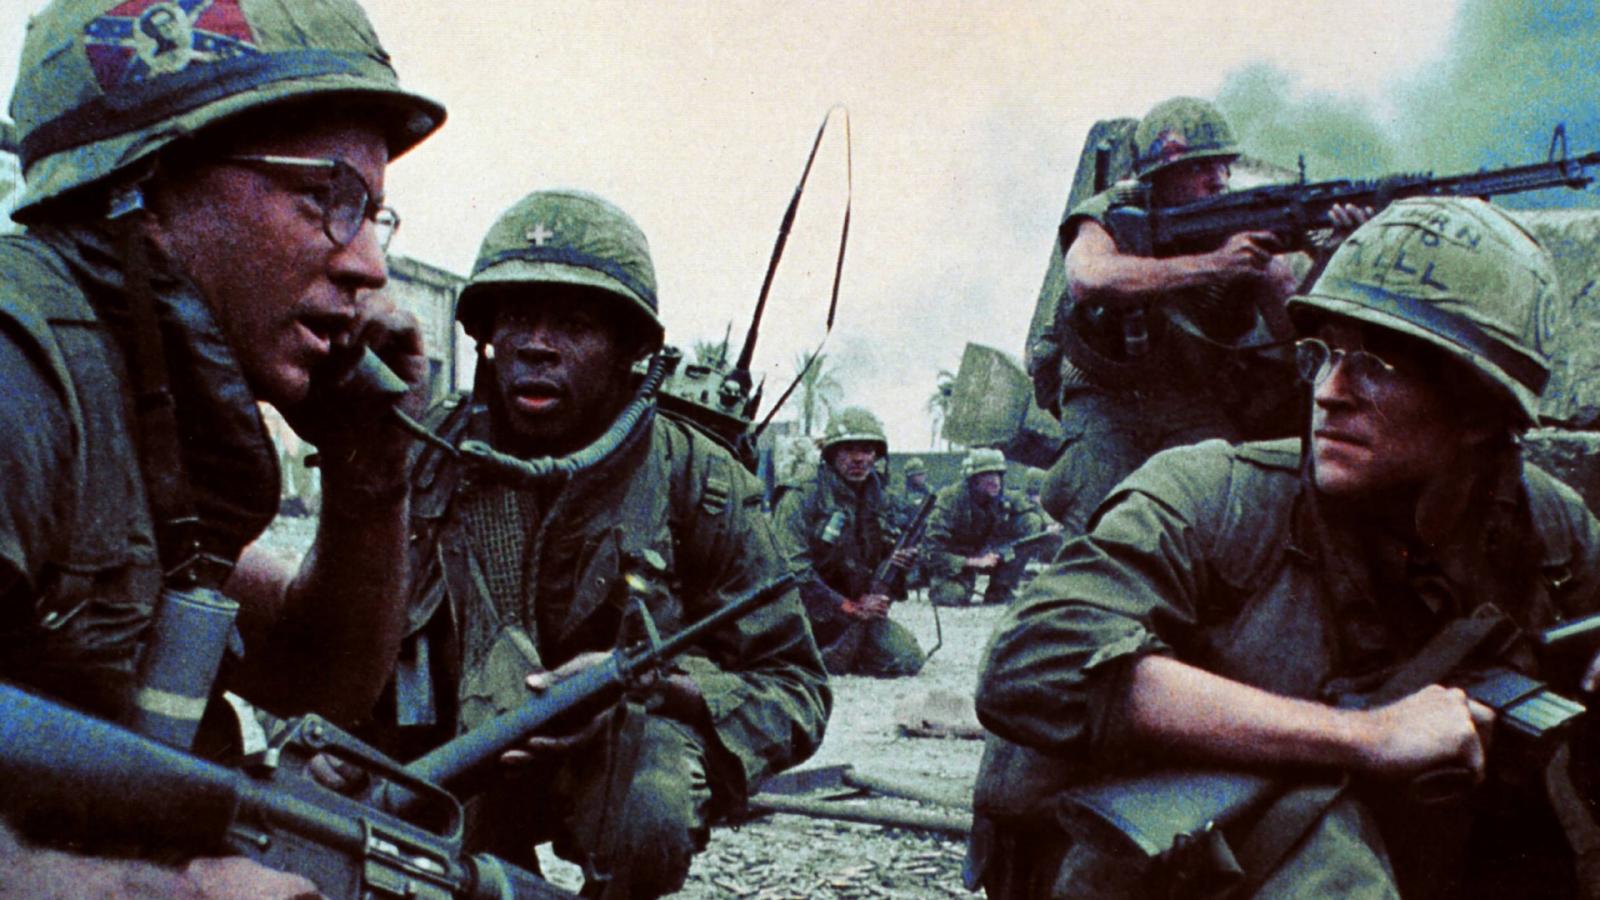 15 War Films with Storylines as Powerful as Saving Private Ryan - image 3